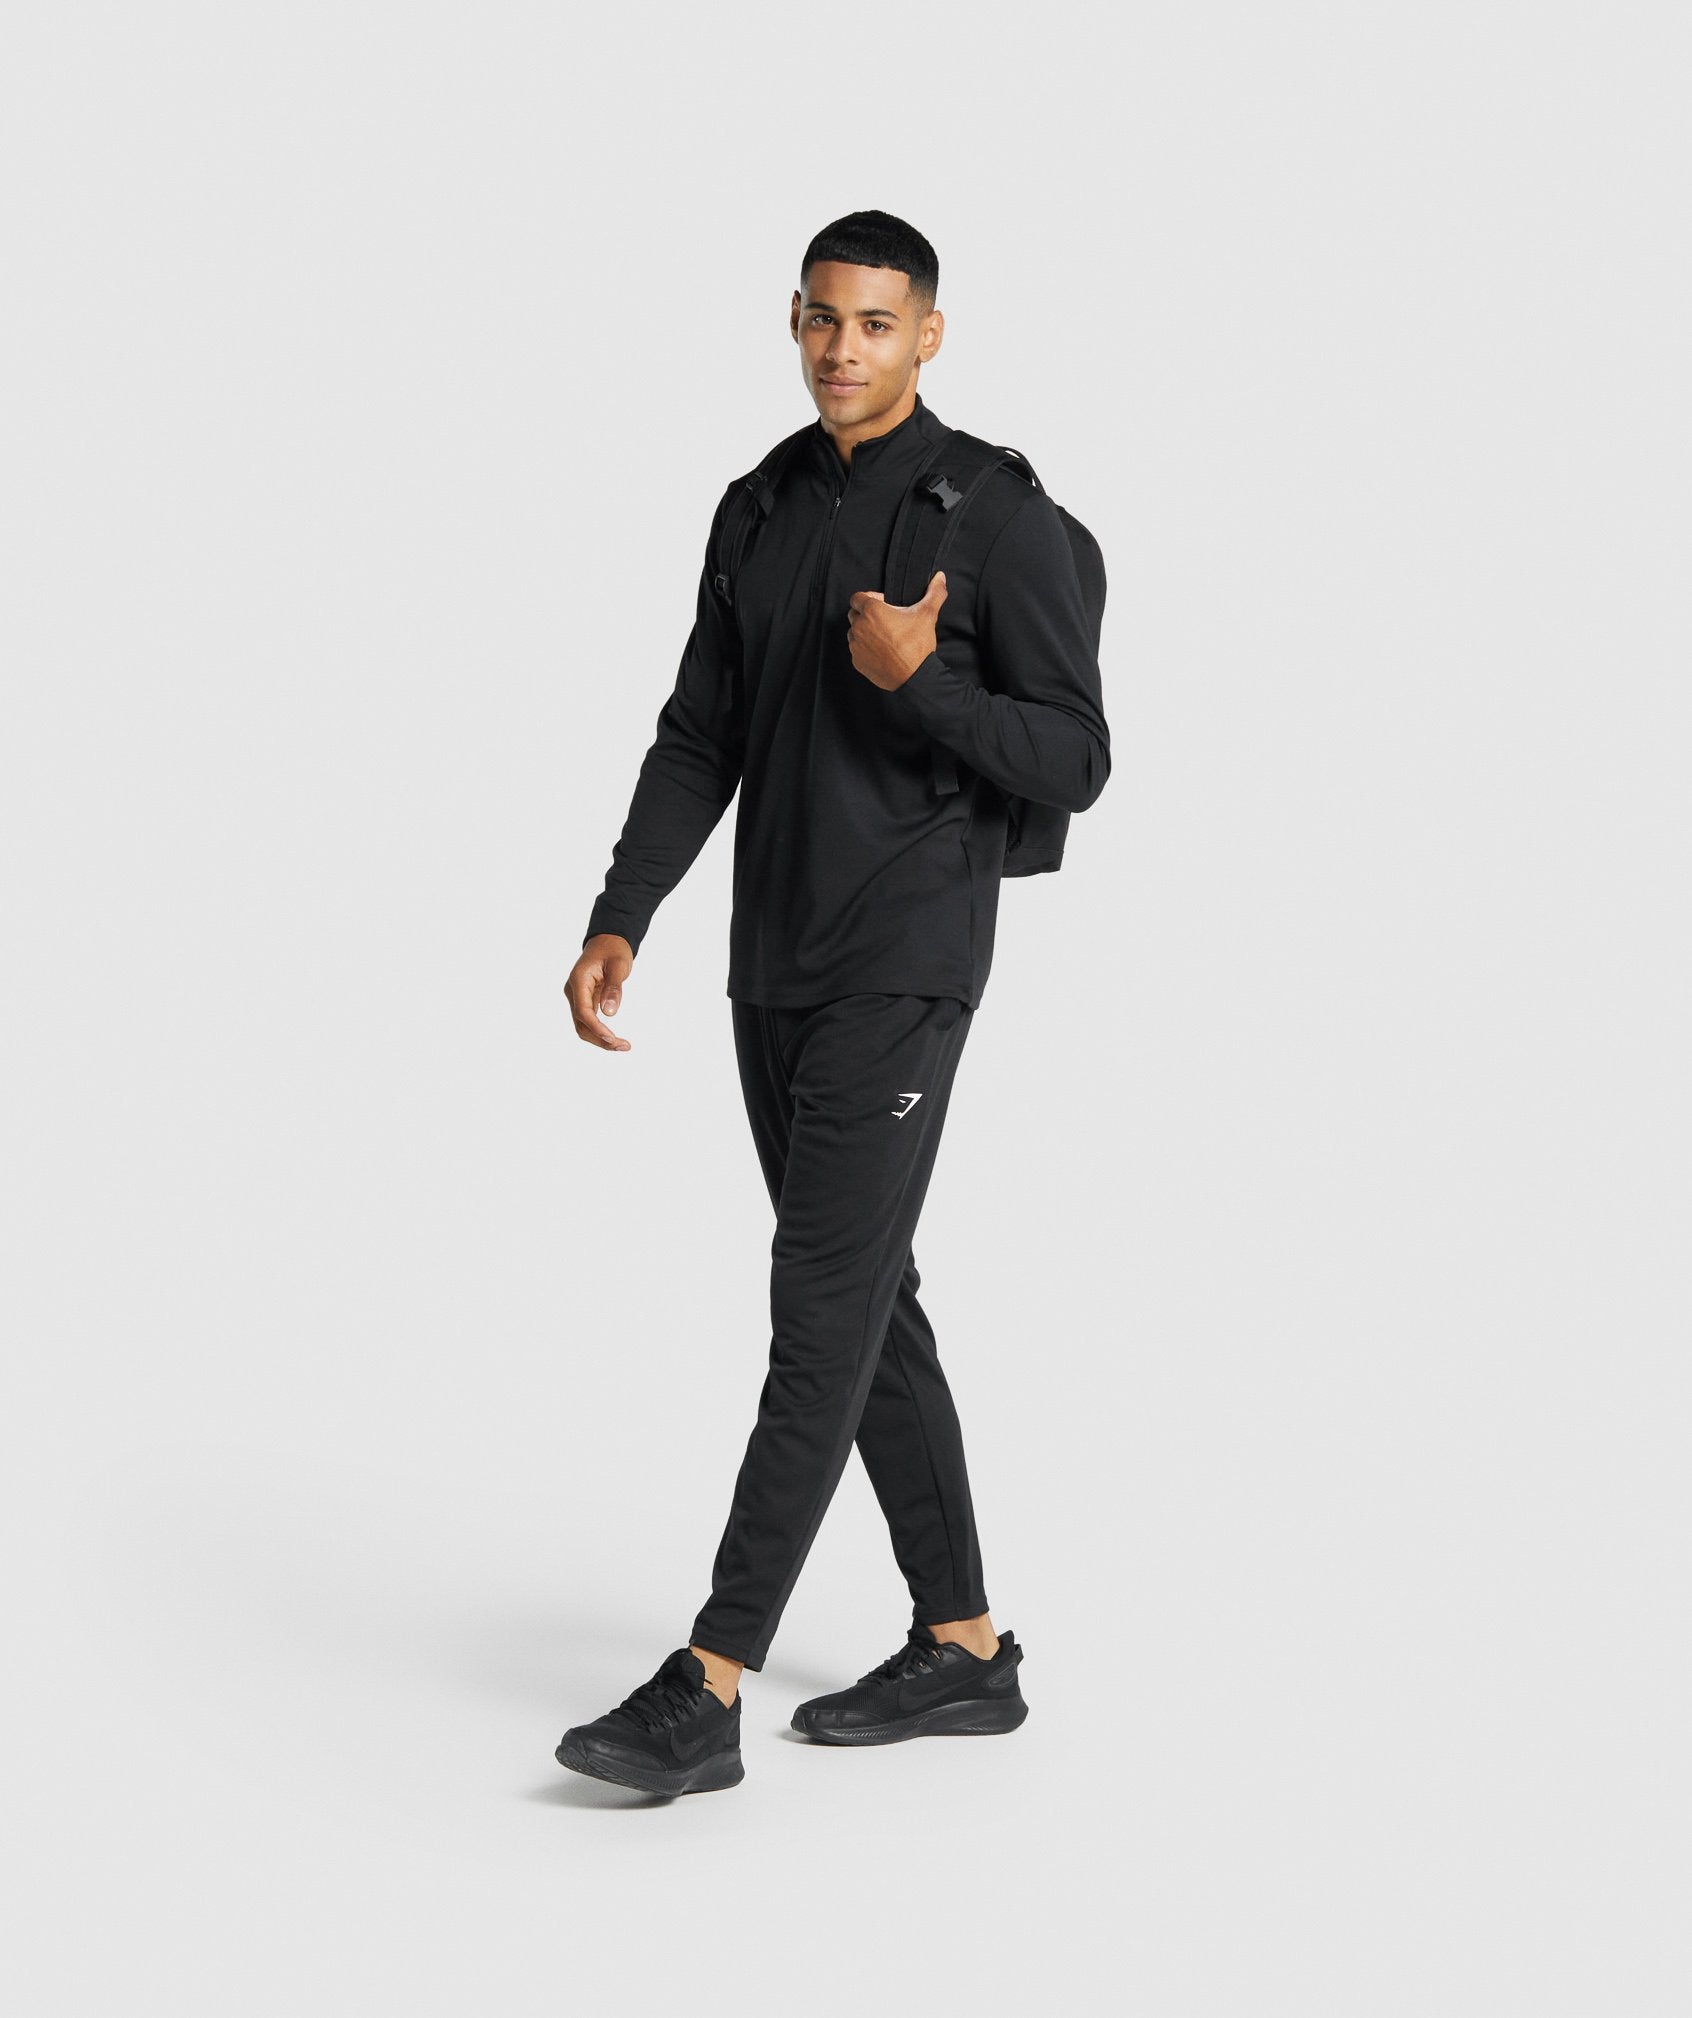 Arrival Knit Joggers in Black - view 4